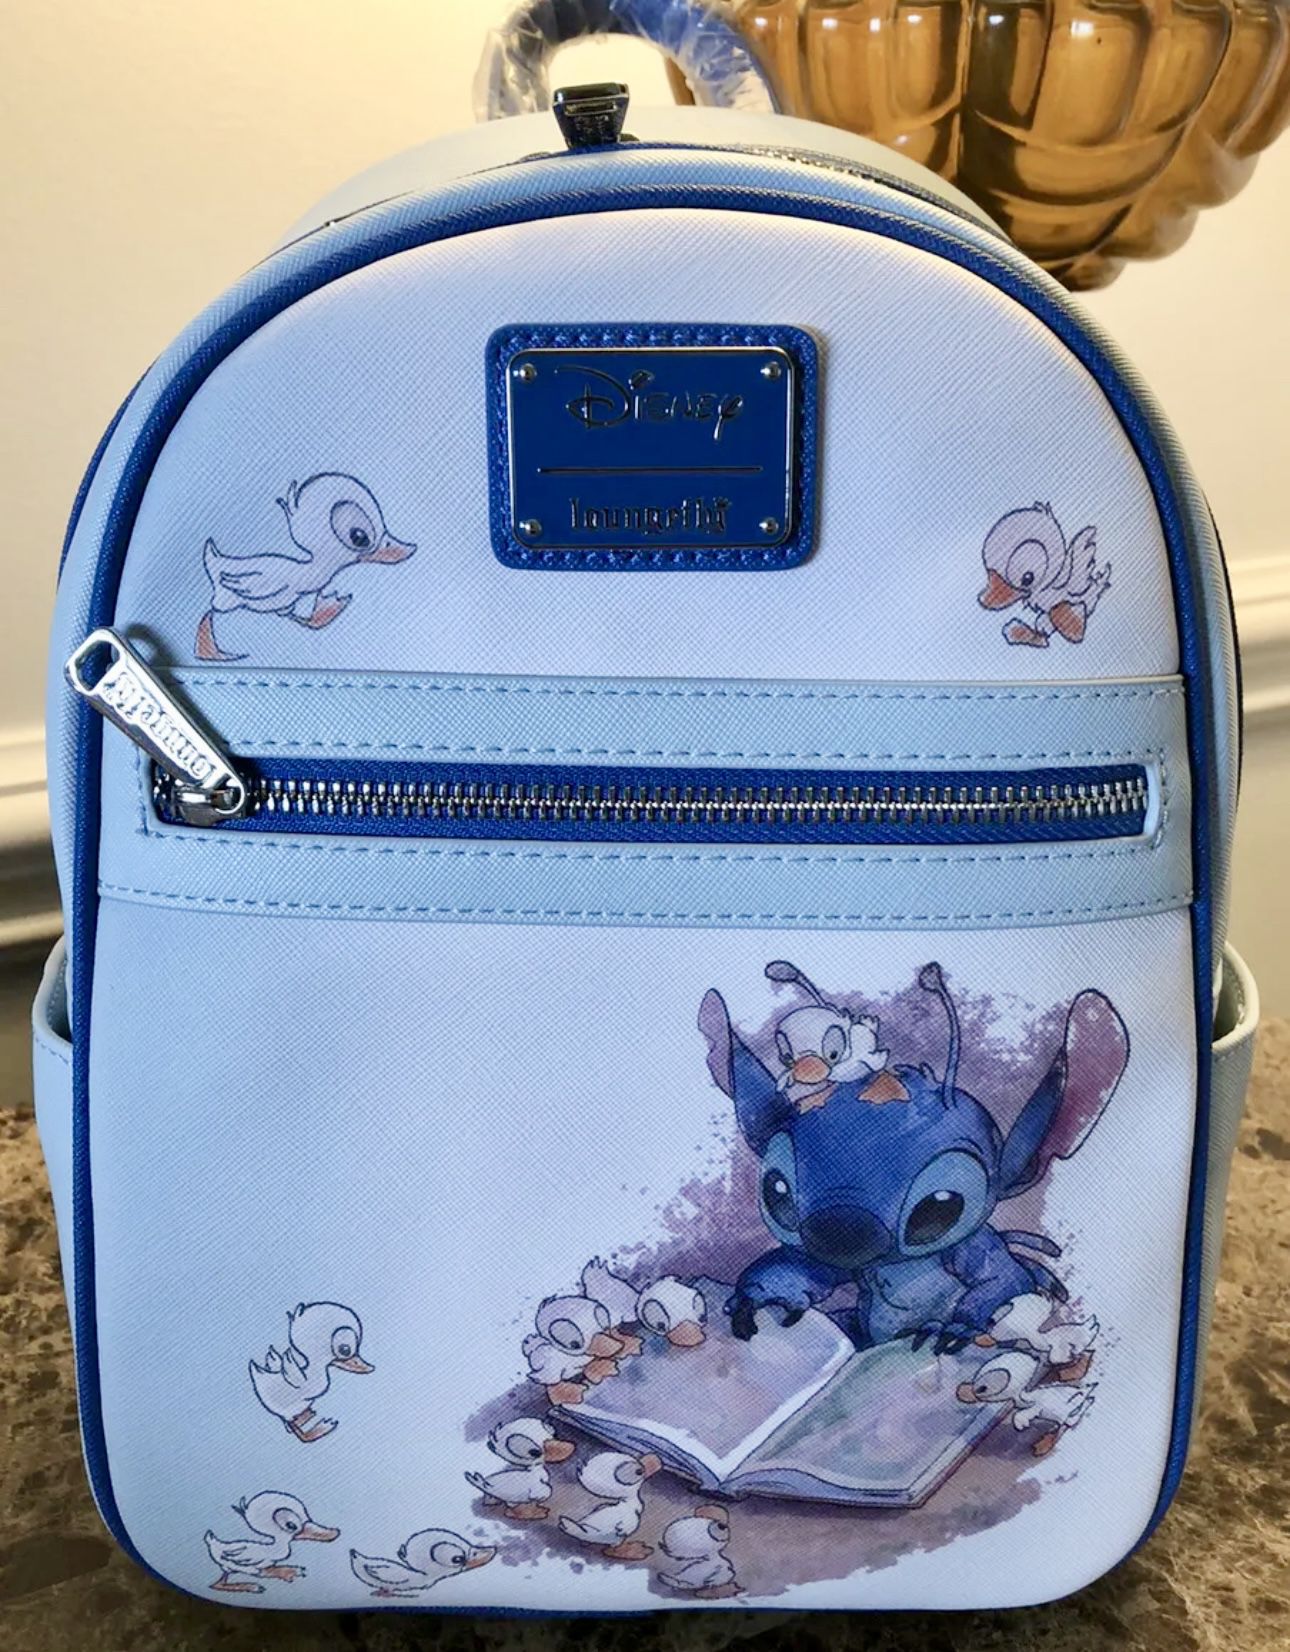 New Disney Lilo And Stitch Ducklings Mini Backpack!